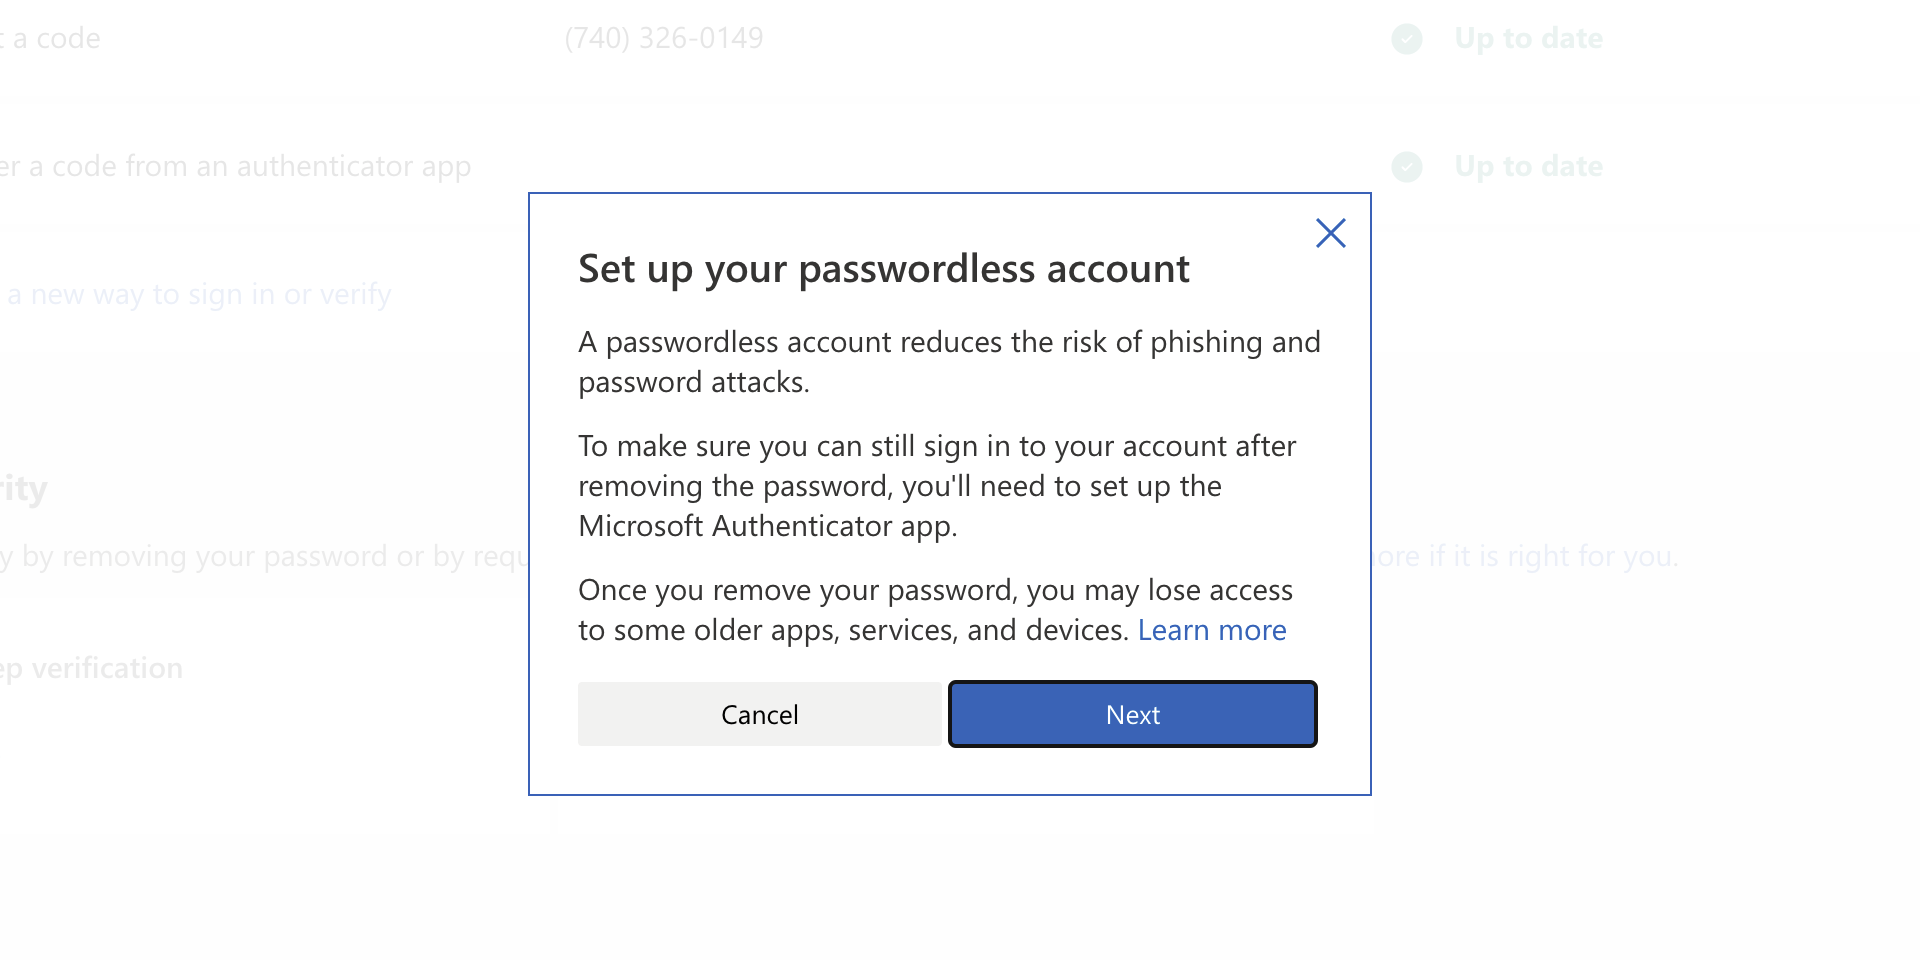 The warning message you'll see when you turn on the passwordless account feature.